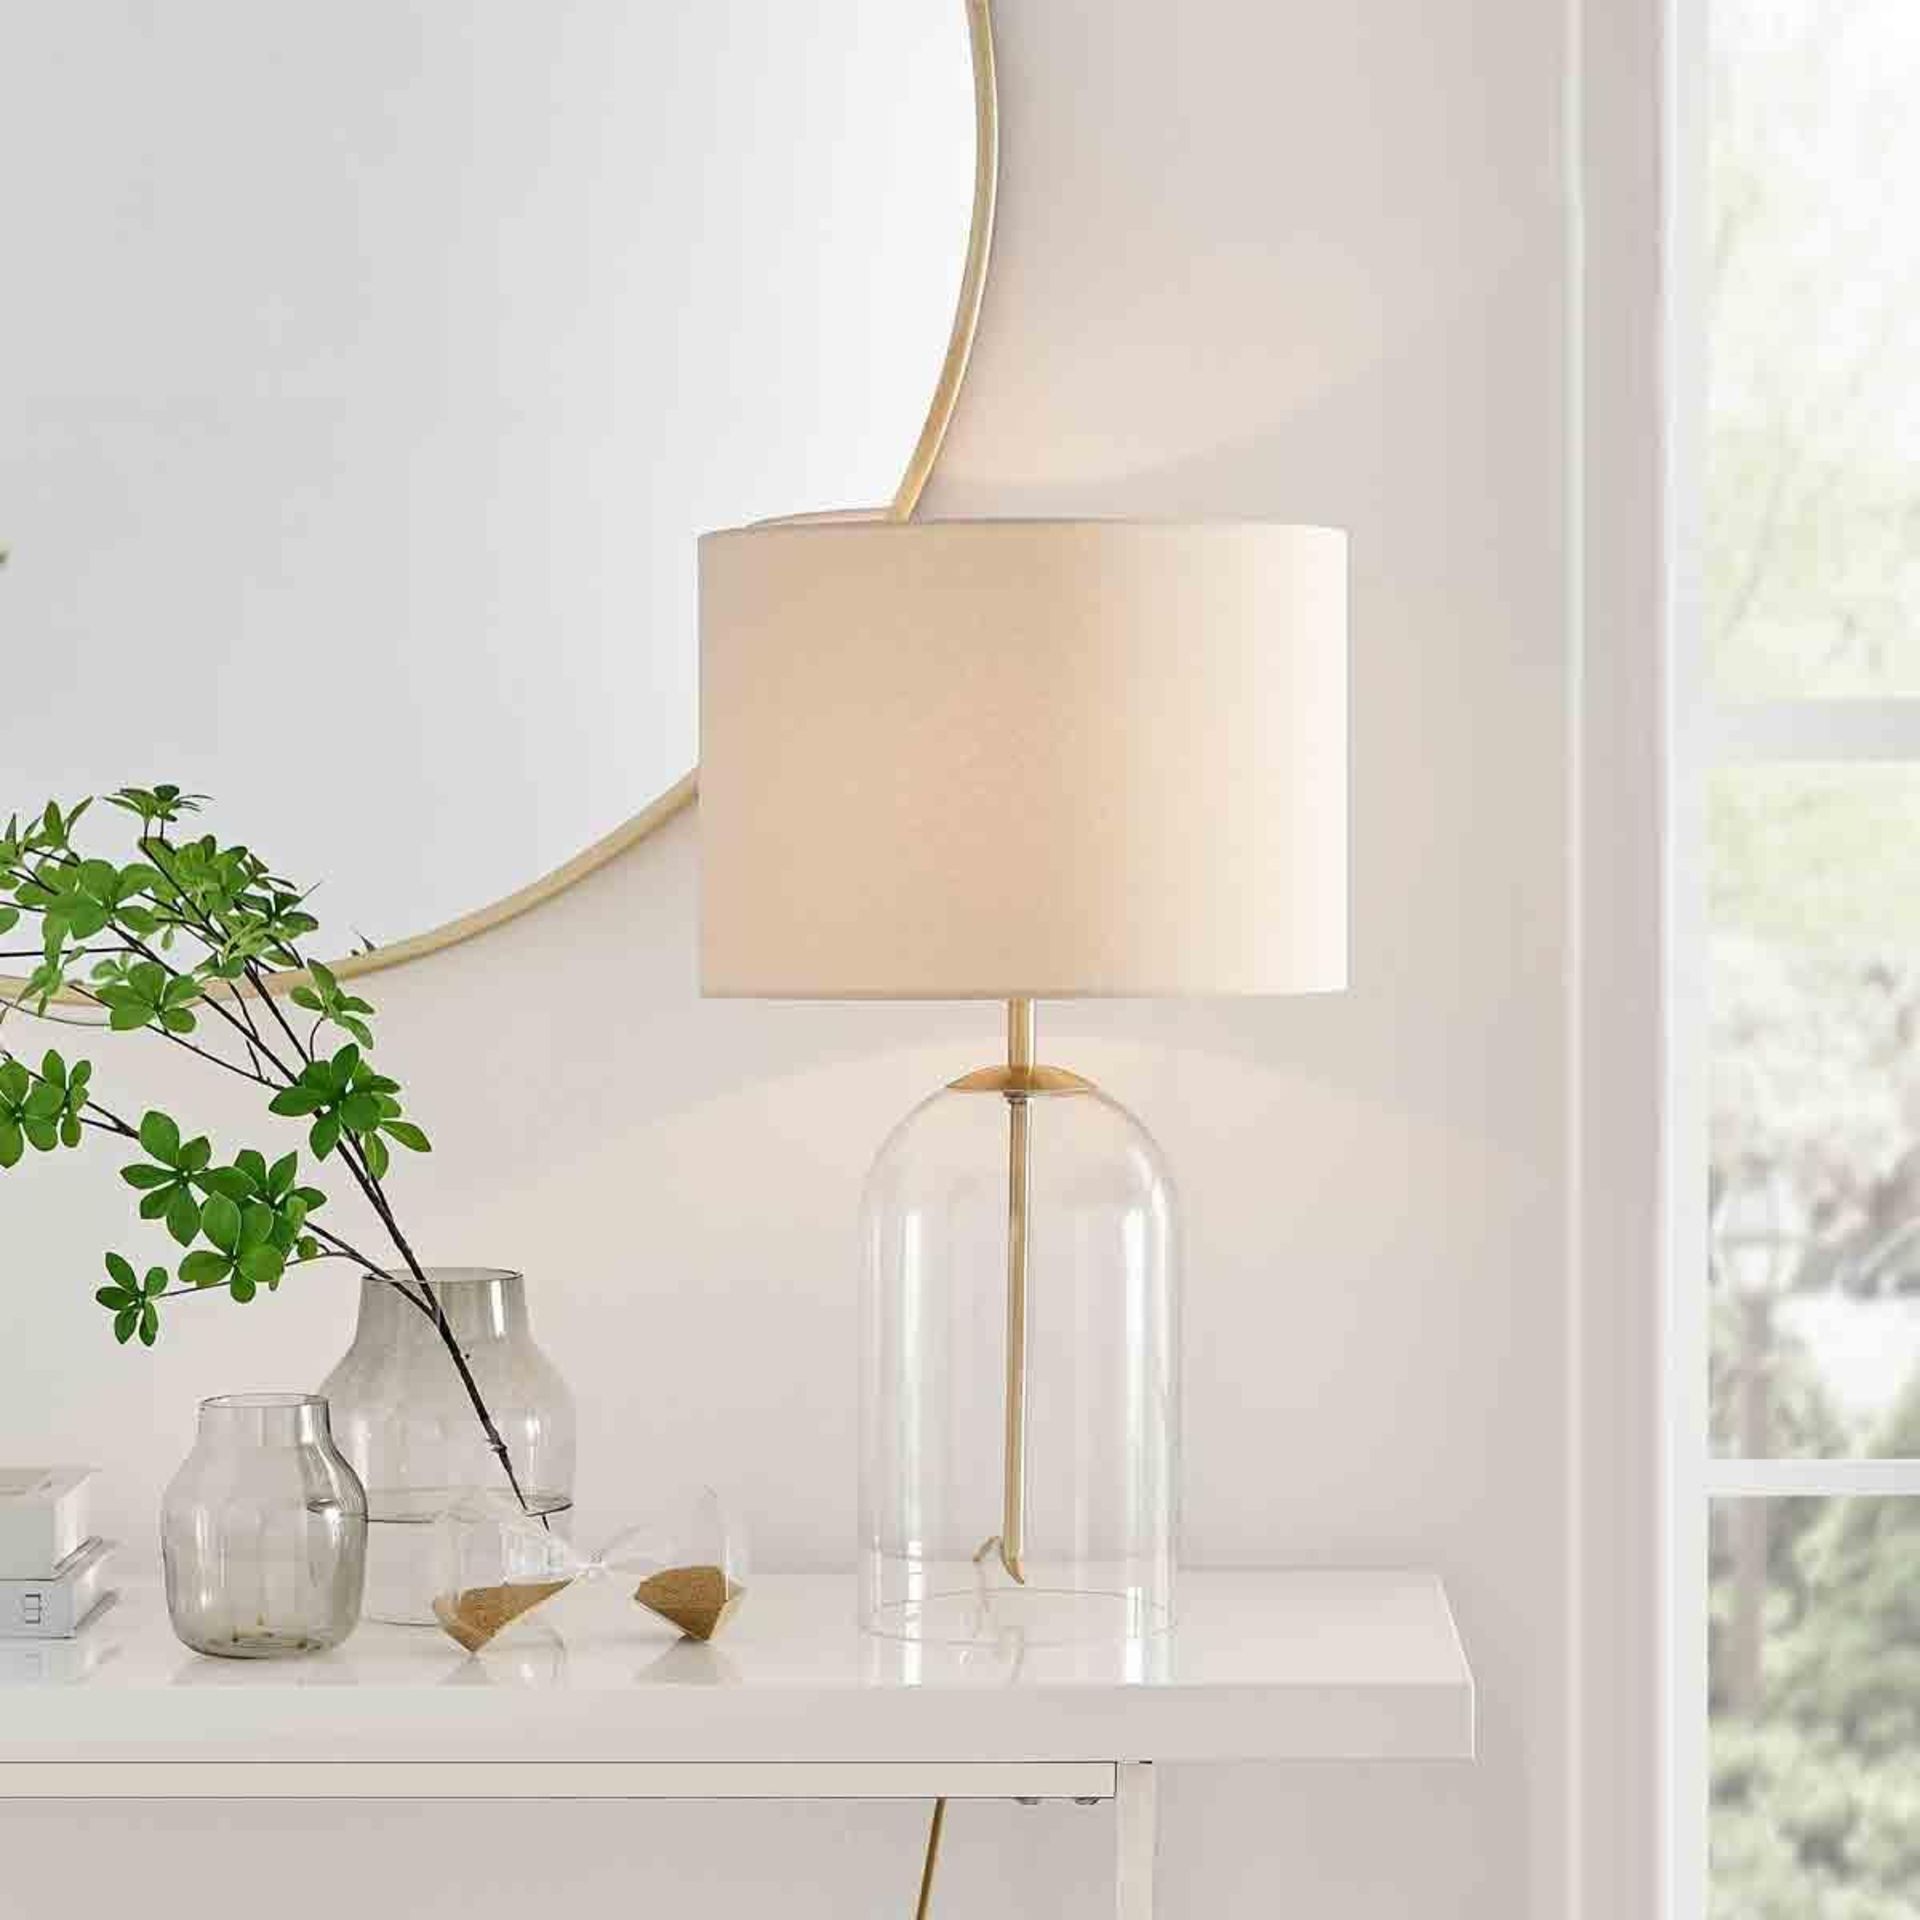 Furniture Box Nora Furniture Box Clear Glass Gold and Cream Shade Table Lamp Light - ER47. Our